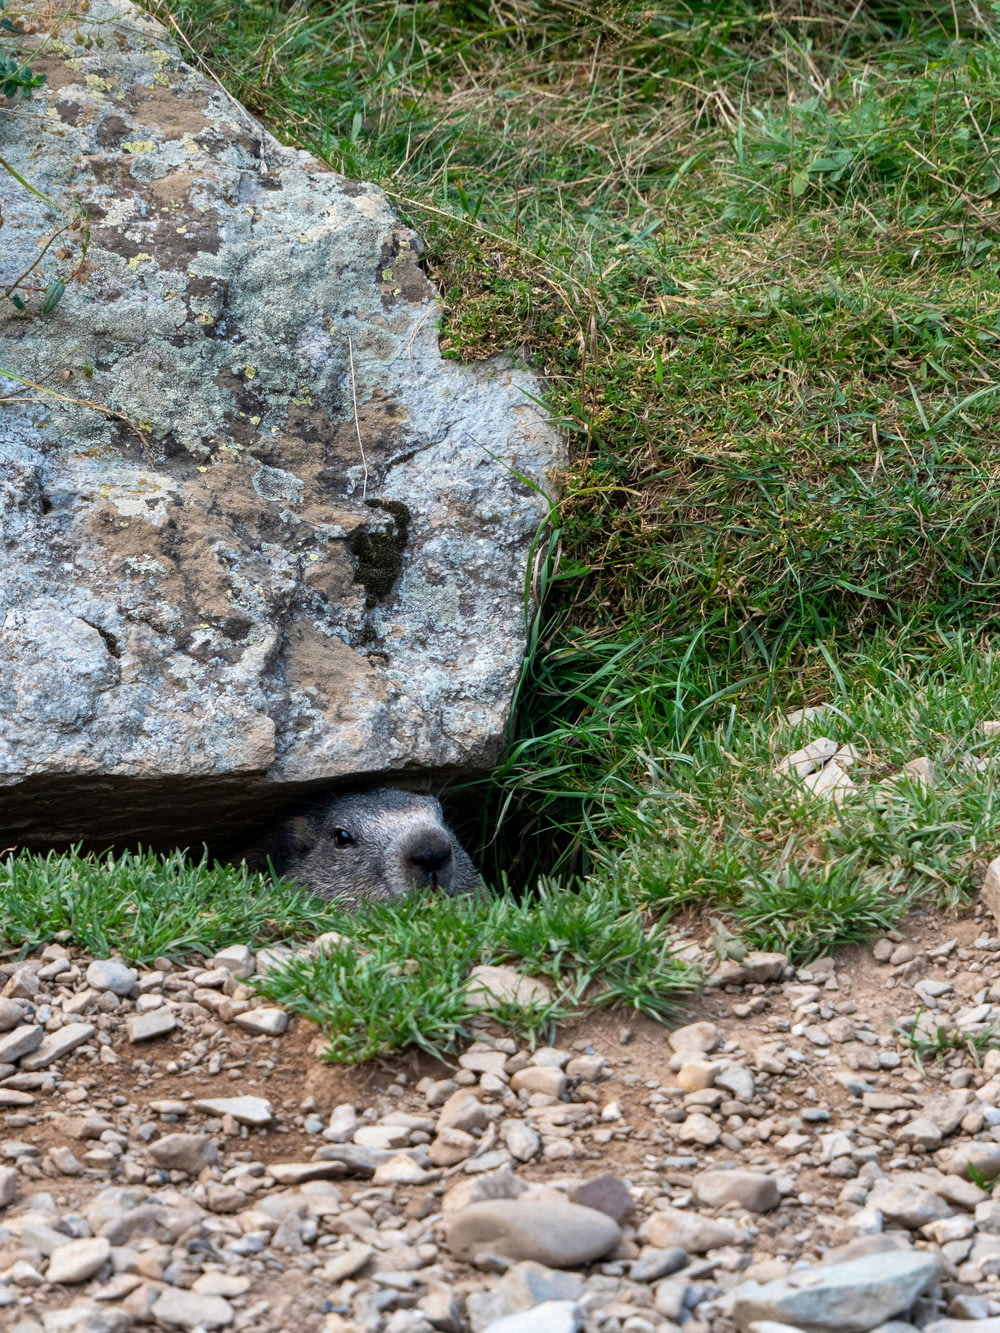 a small animal hiding under a large rock